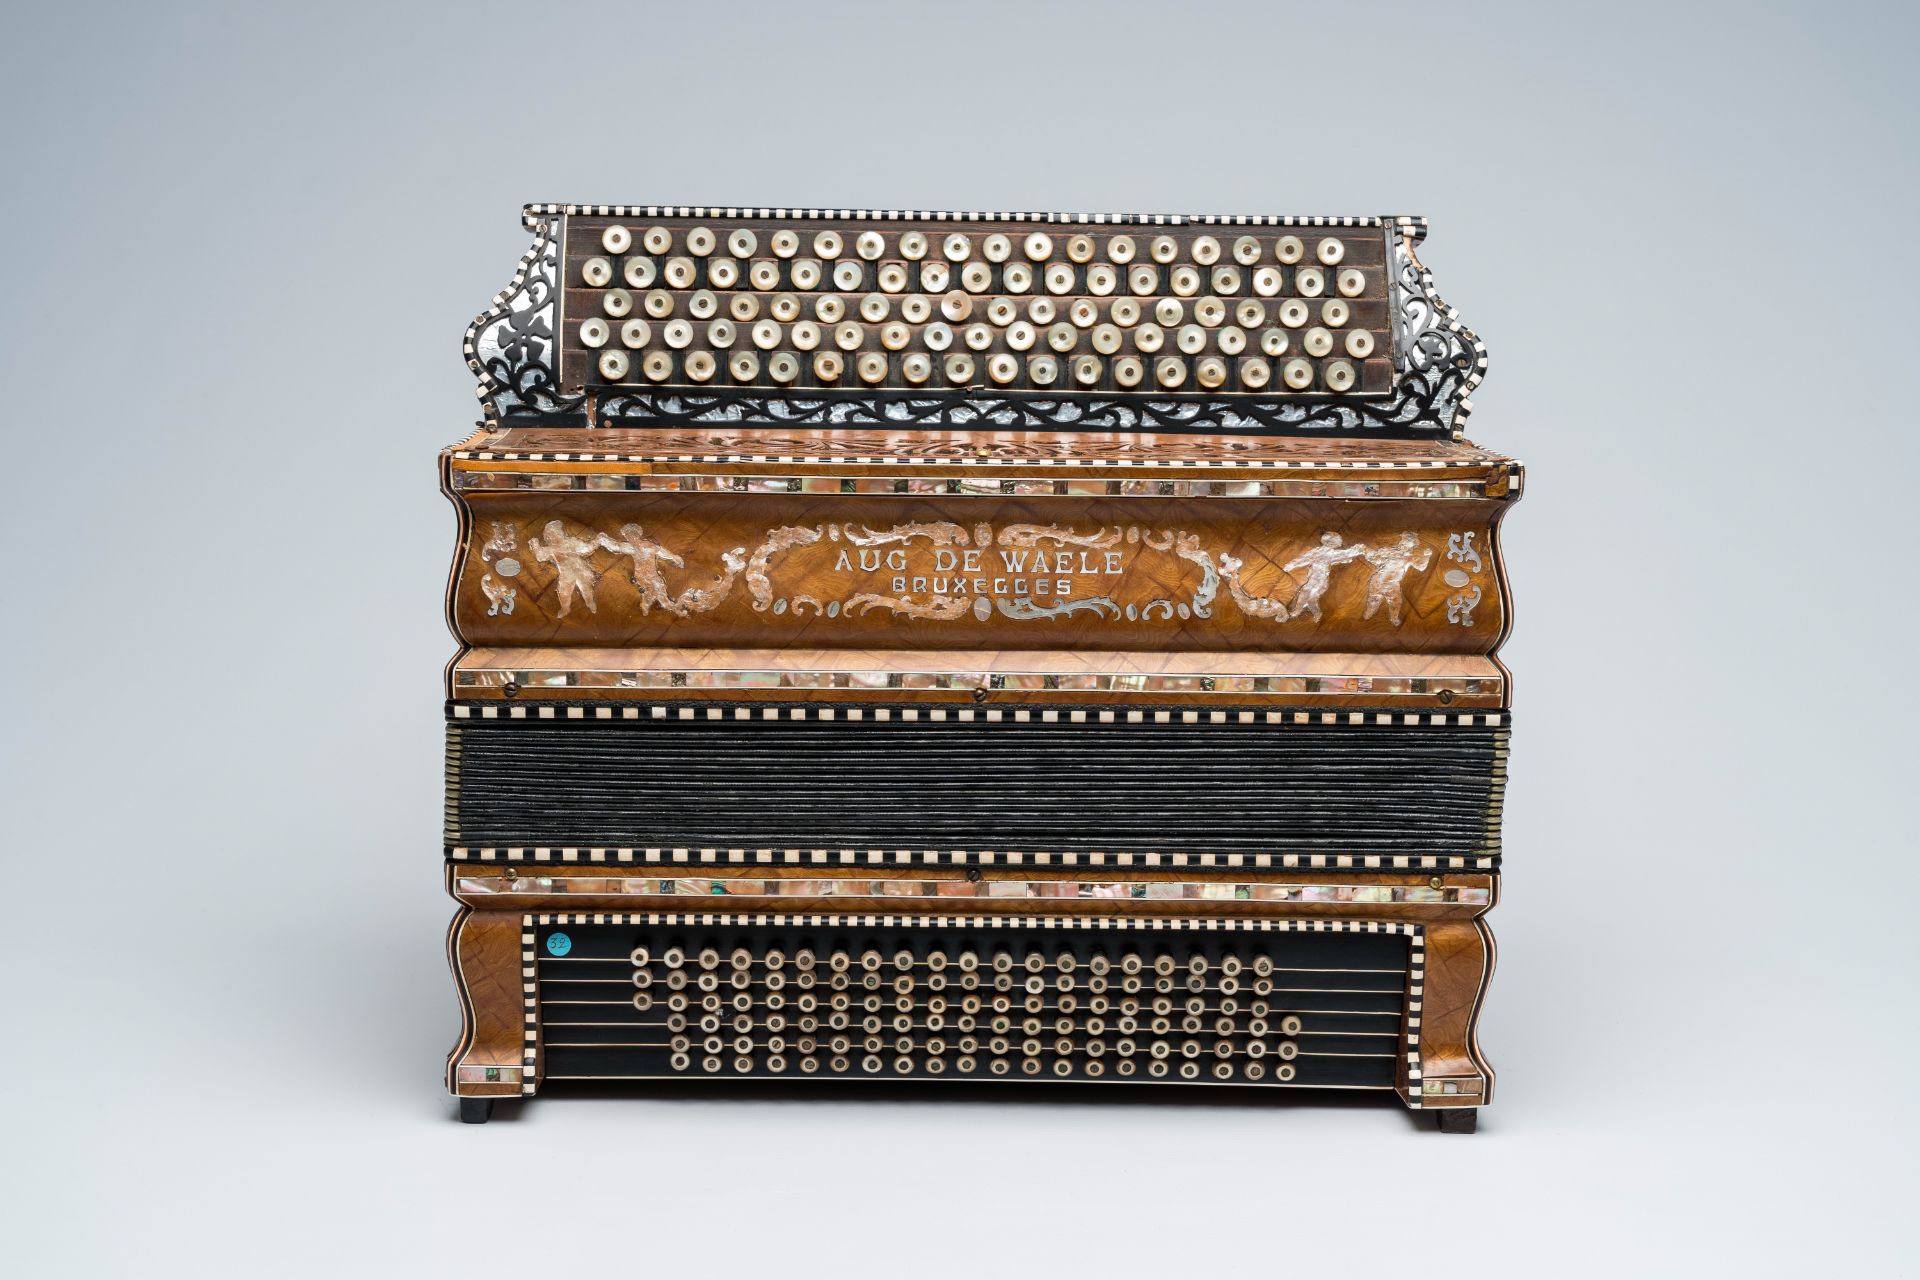 A Belgian 'August De Waele' chromatic accordion with button keyboard, ca. 1920 - Image 2 of 5